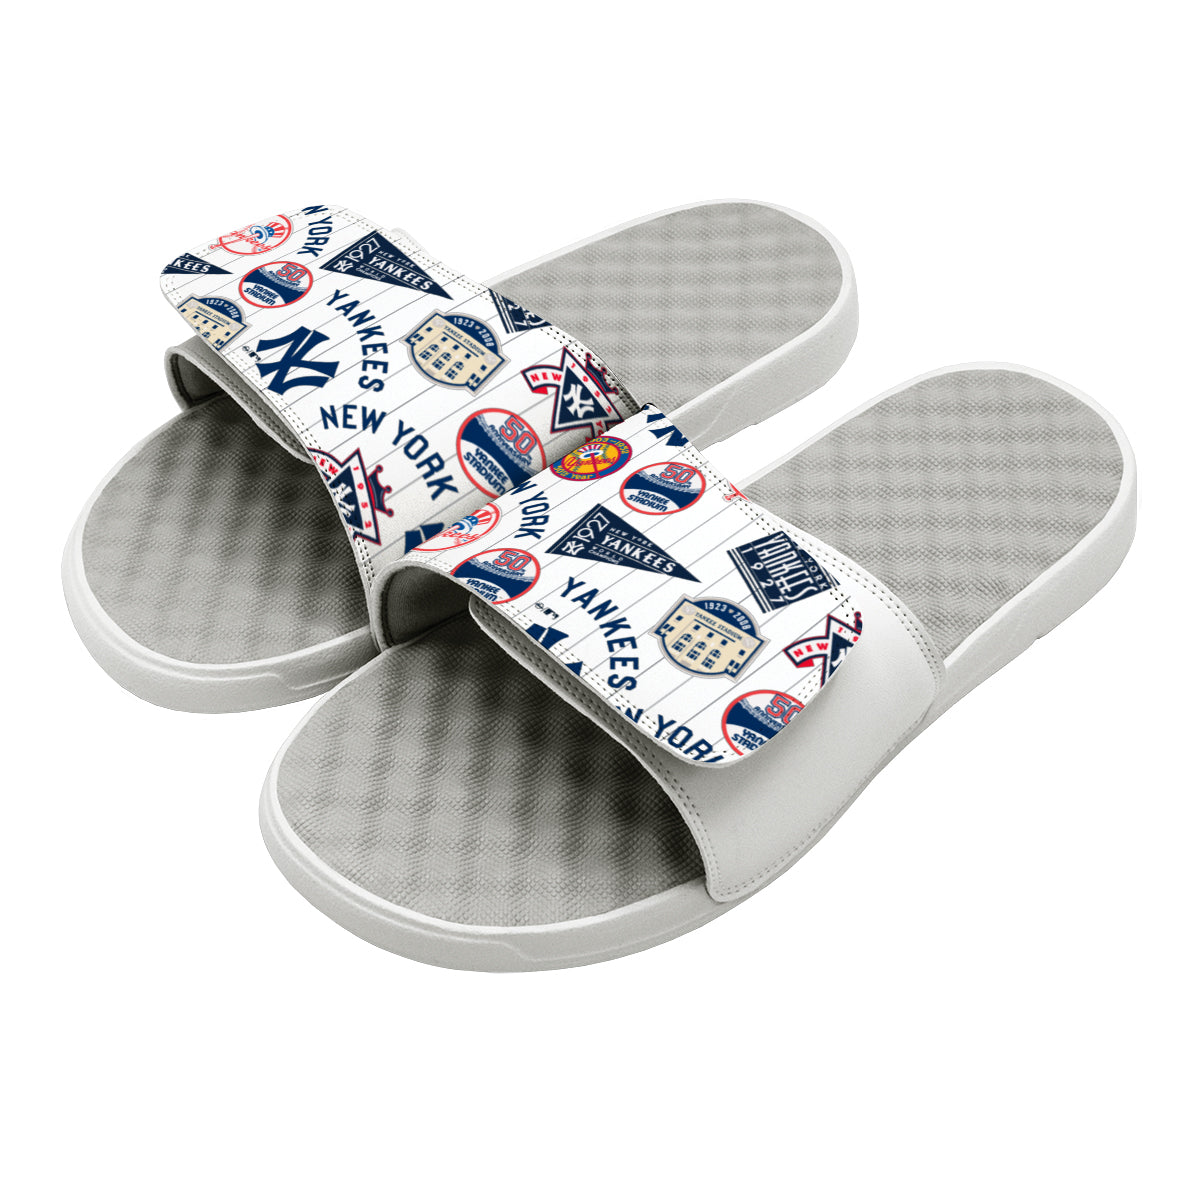 Yankees Cooperstown Loudmouth Slides